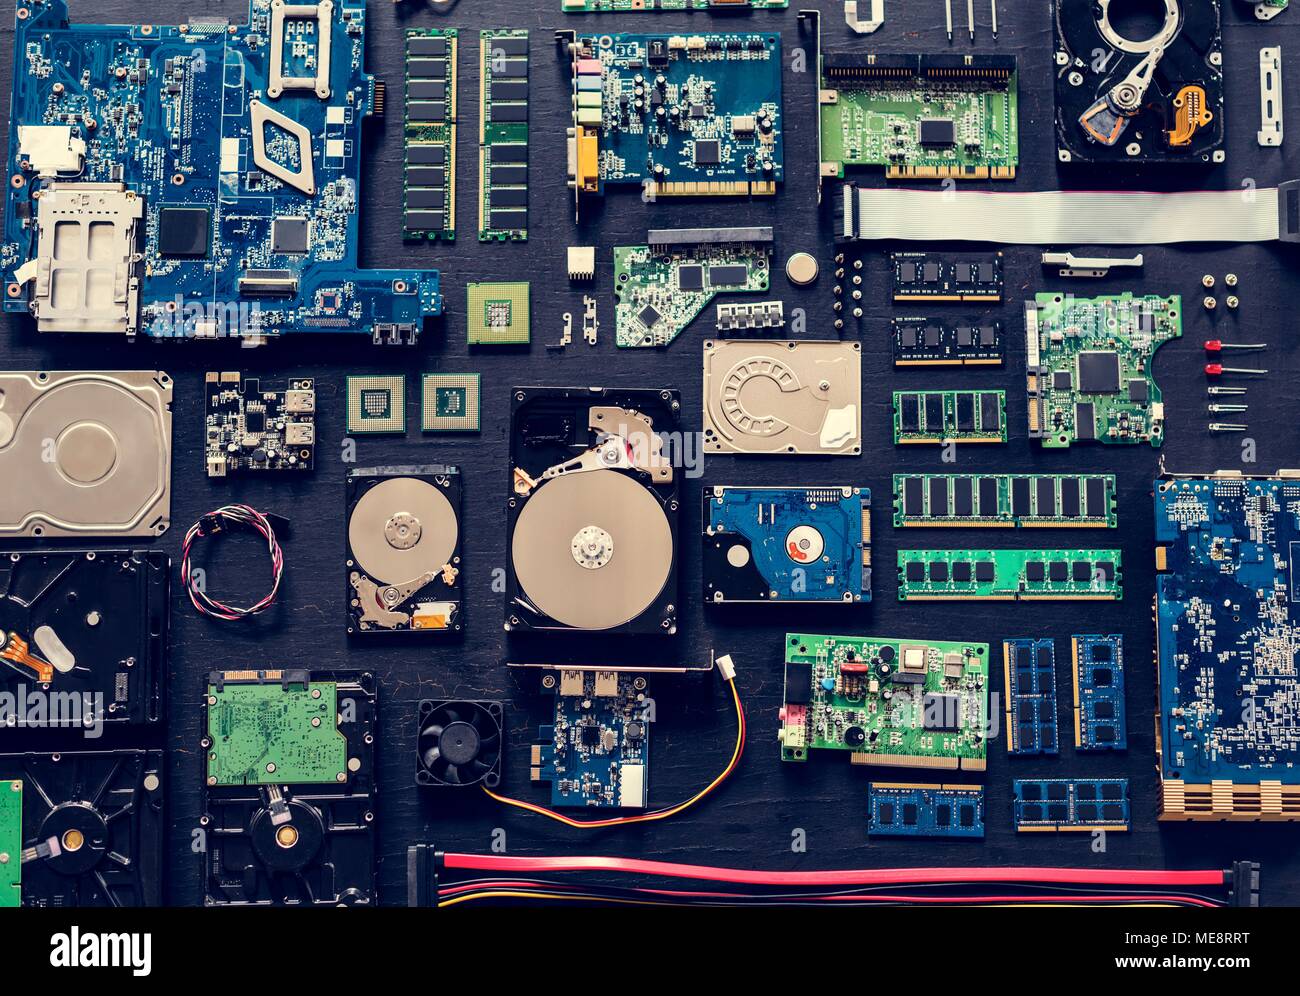 Aerial view of computer electronics componets parts flatlay Stock Photo